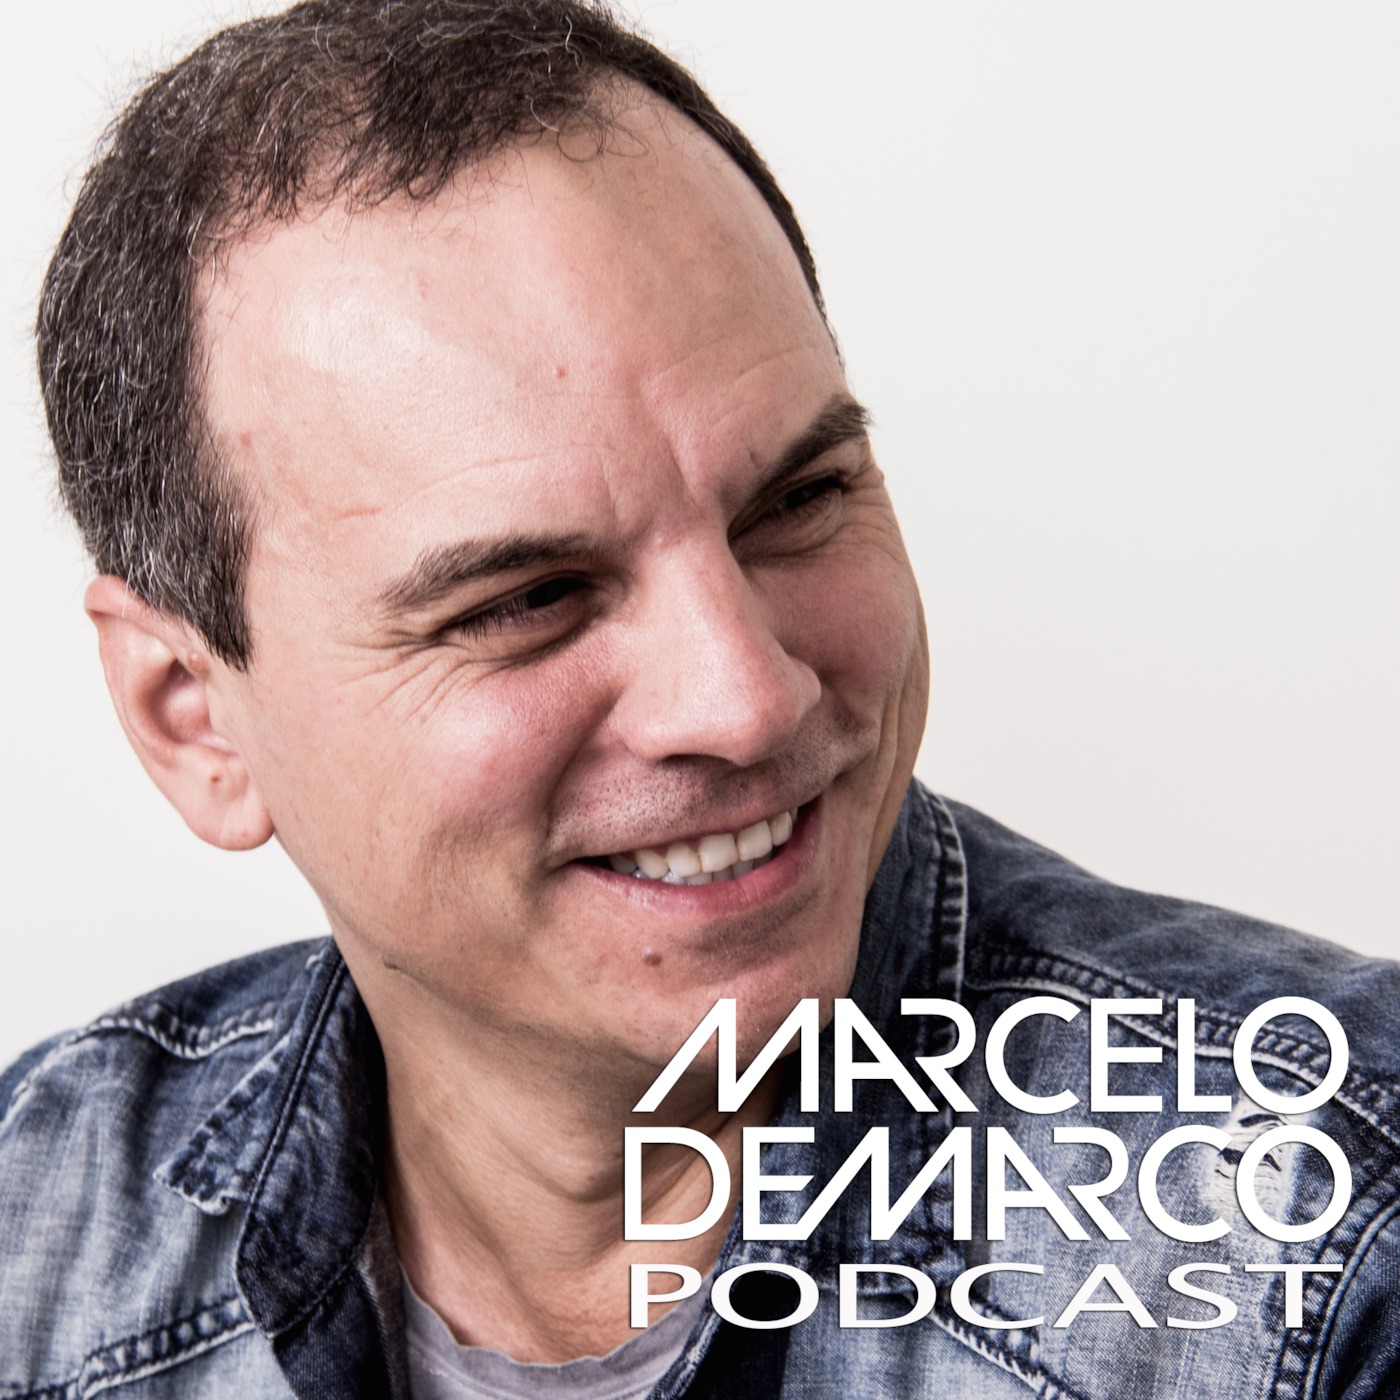 Marcelo Demarco's Podcast